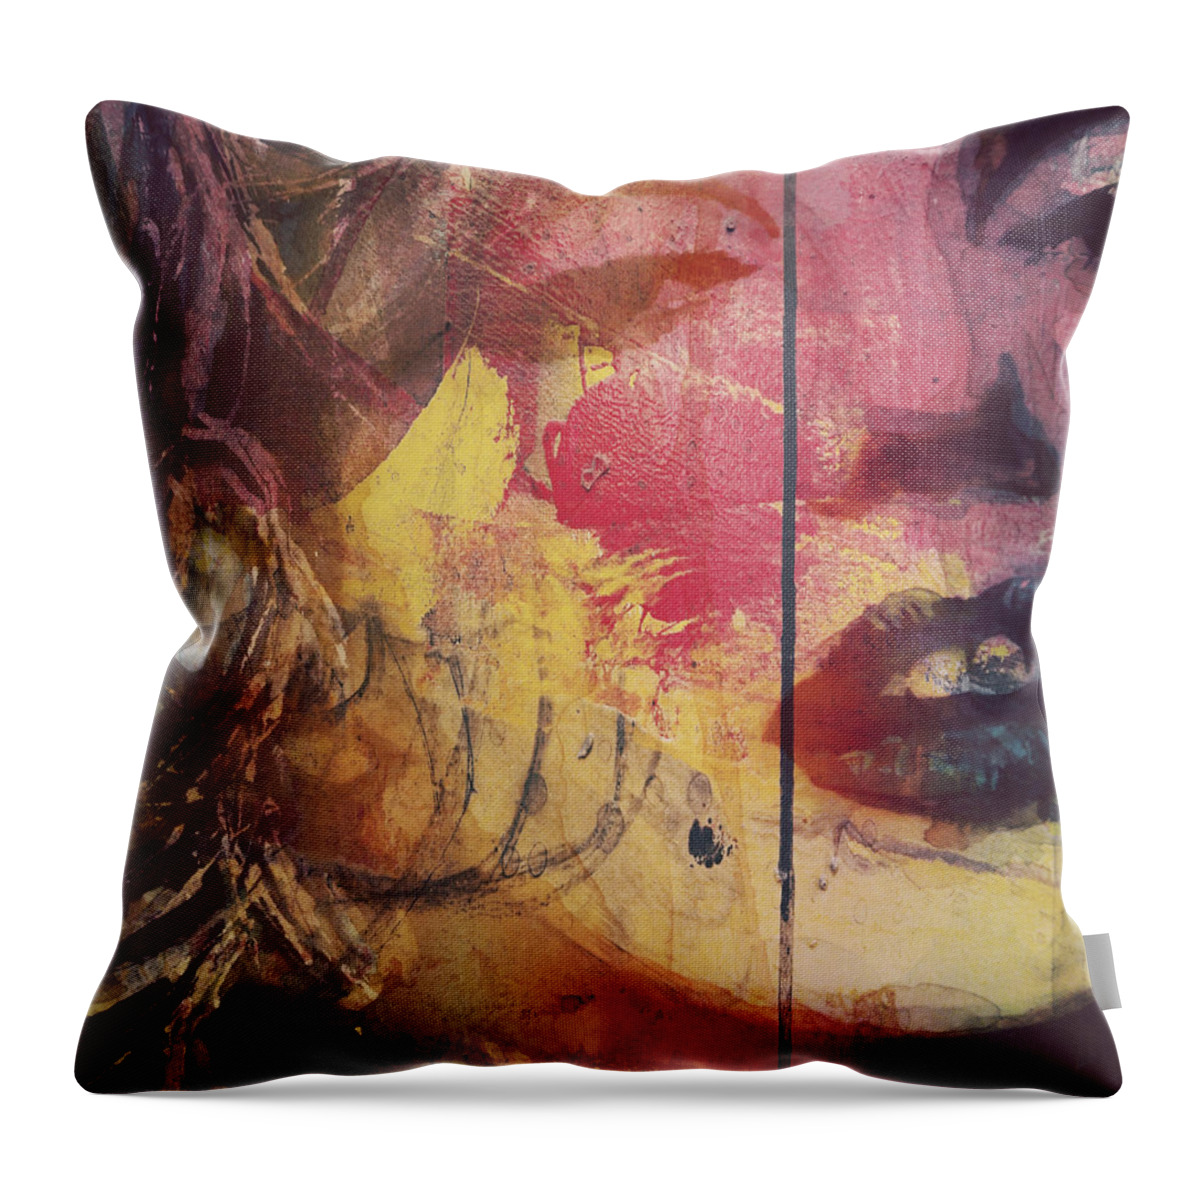 Marilyn Monroe Throw Pillow featuring the painting I've Seen That Movie Too by Paul Lovering